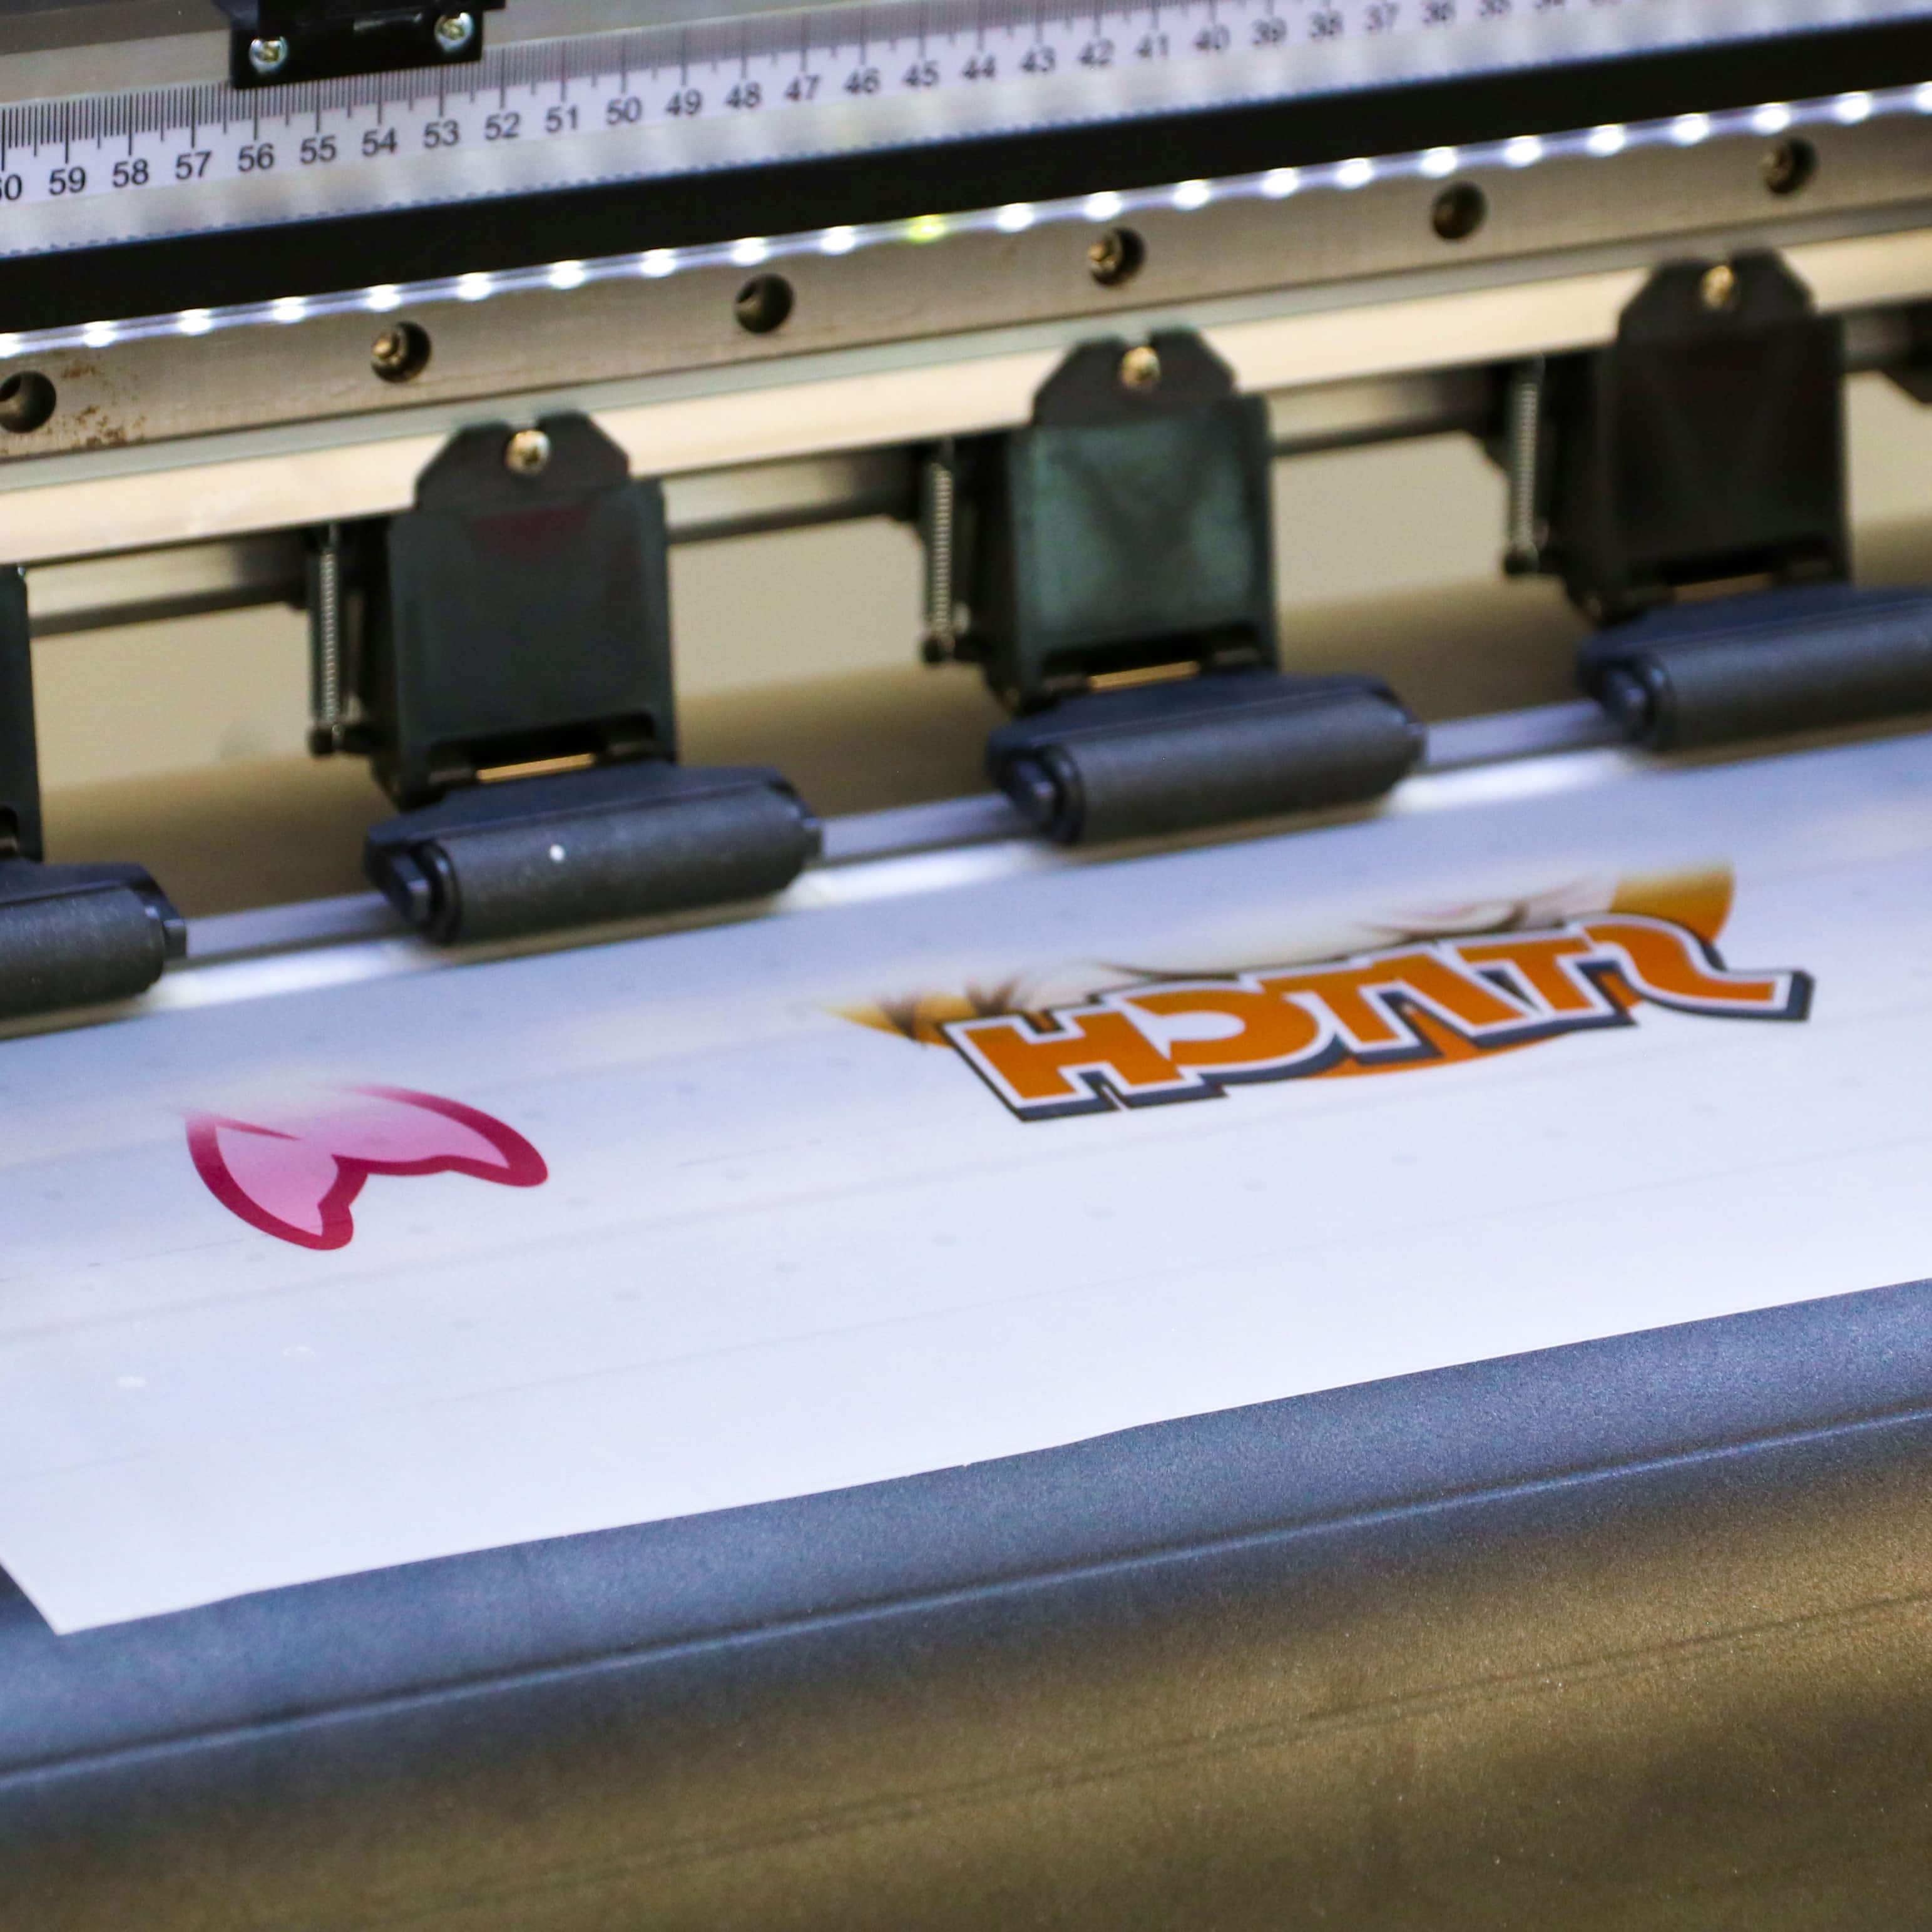 Experience next-generation printing features